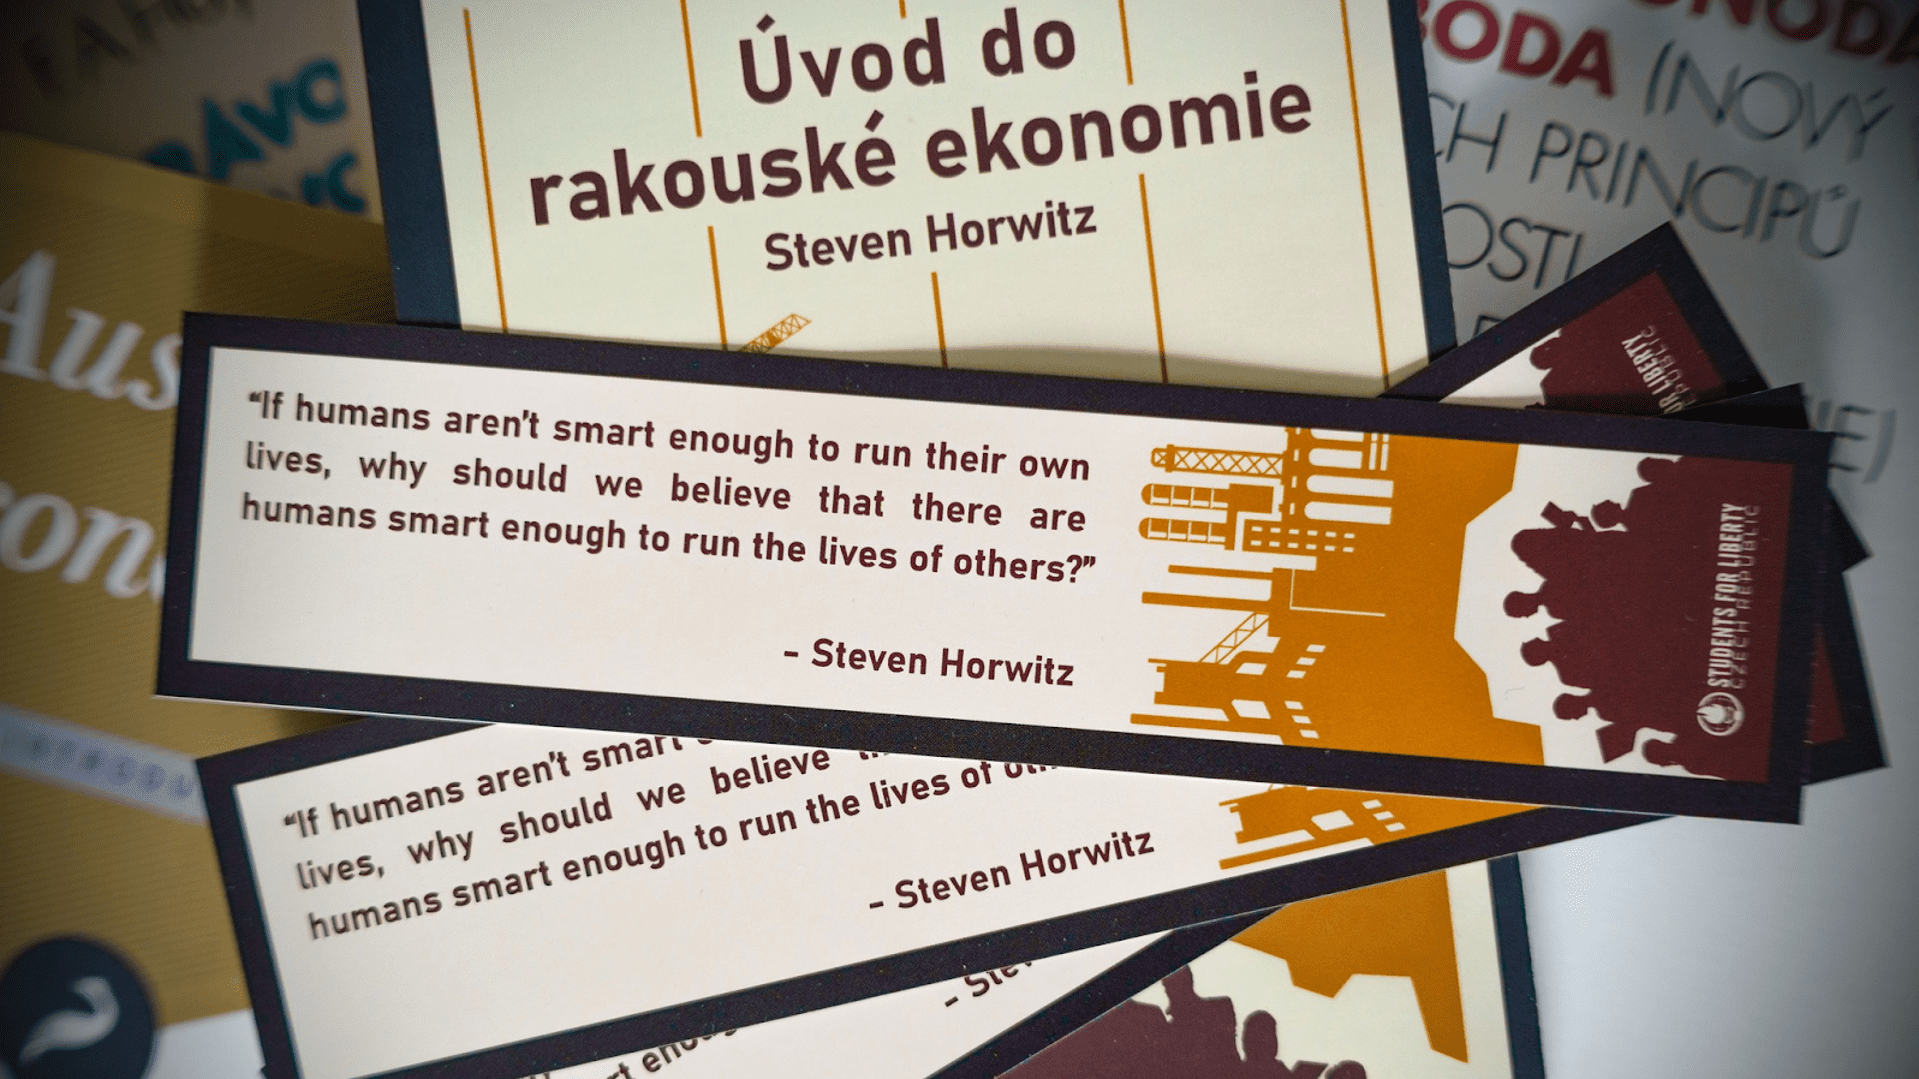 With inflation soaring, our team in Czechia is working on providing sound economic education. For that purpose, they have decided to translate and publish a Czech version of Austrian Economics: An Introduction, the latest publication by Professor Steven Horwitz, whom the team has also hosted at their events in the past.